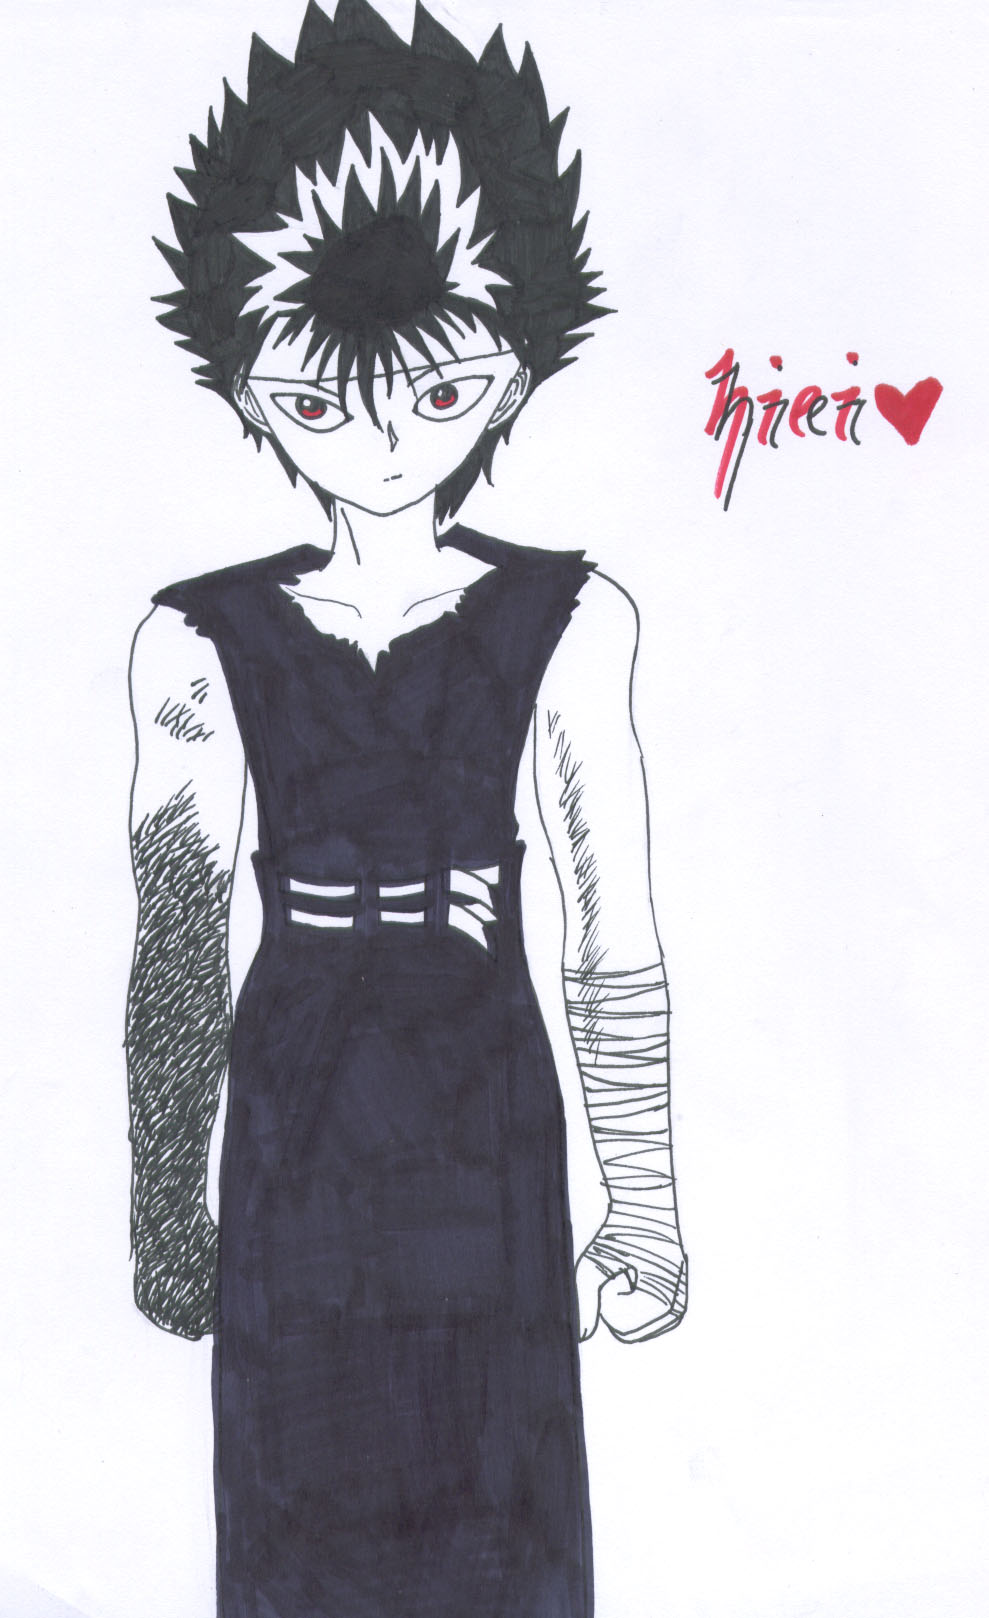 Hiei with a crispy arm! by AJay-the-Pyro